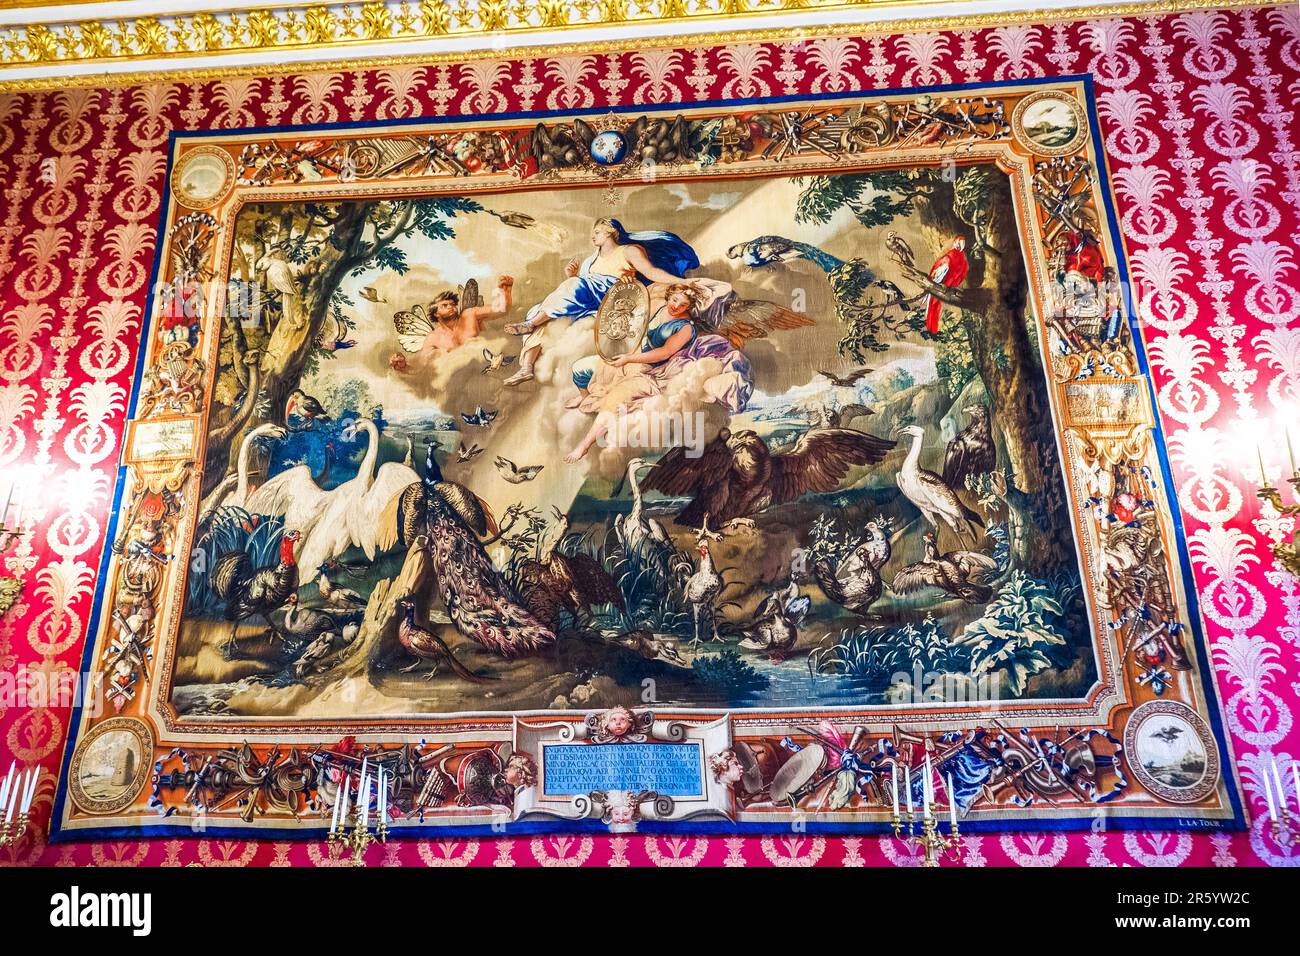 Tapestry from the Manifacture Royale des Gobelins (2nd half of the 19th century during the Savoy period)  in the first Antechamber (diplomatic Salon) in the Royal Palace of Naples that In 1734 became the royal residence of the Bourbons - Naples, Italy Stock Photo